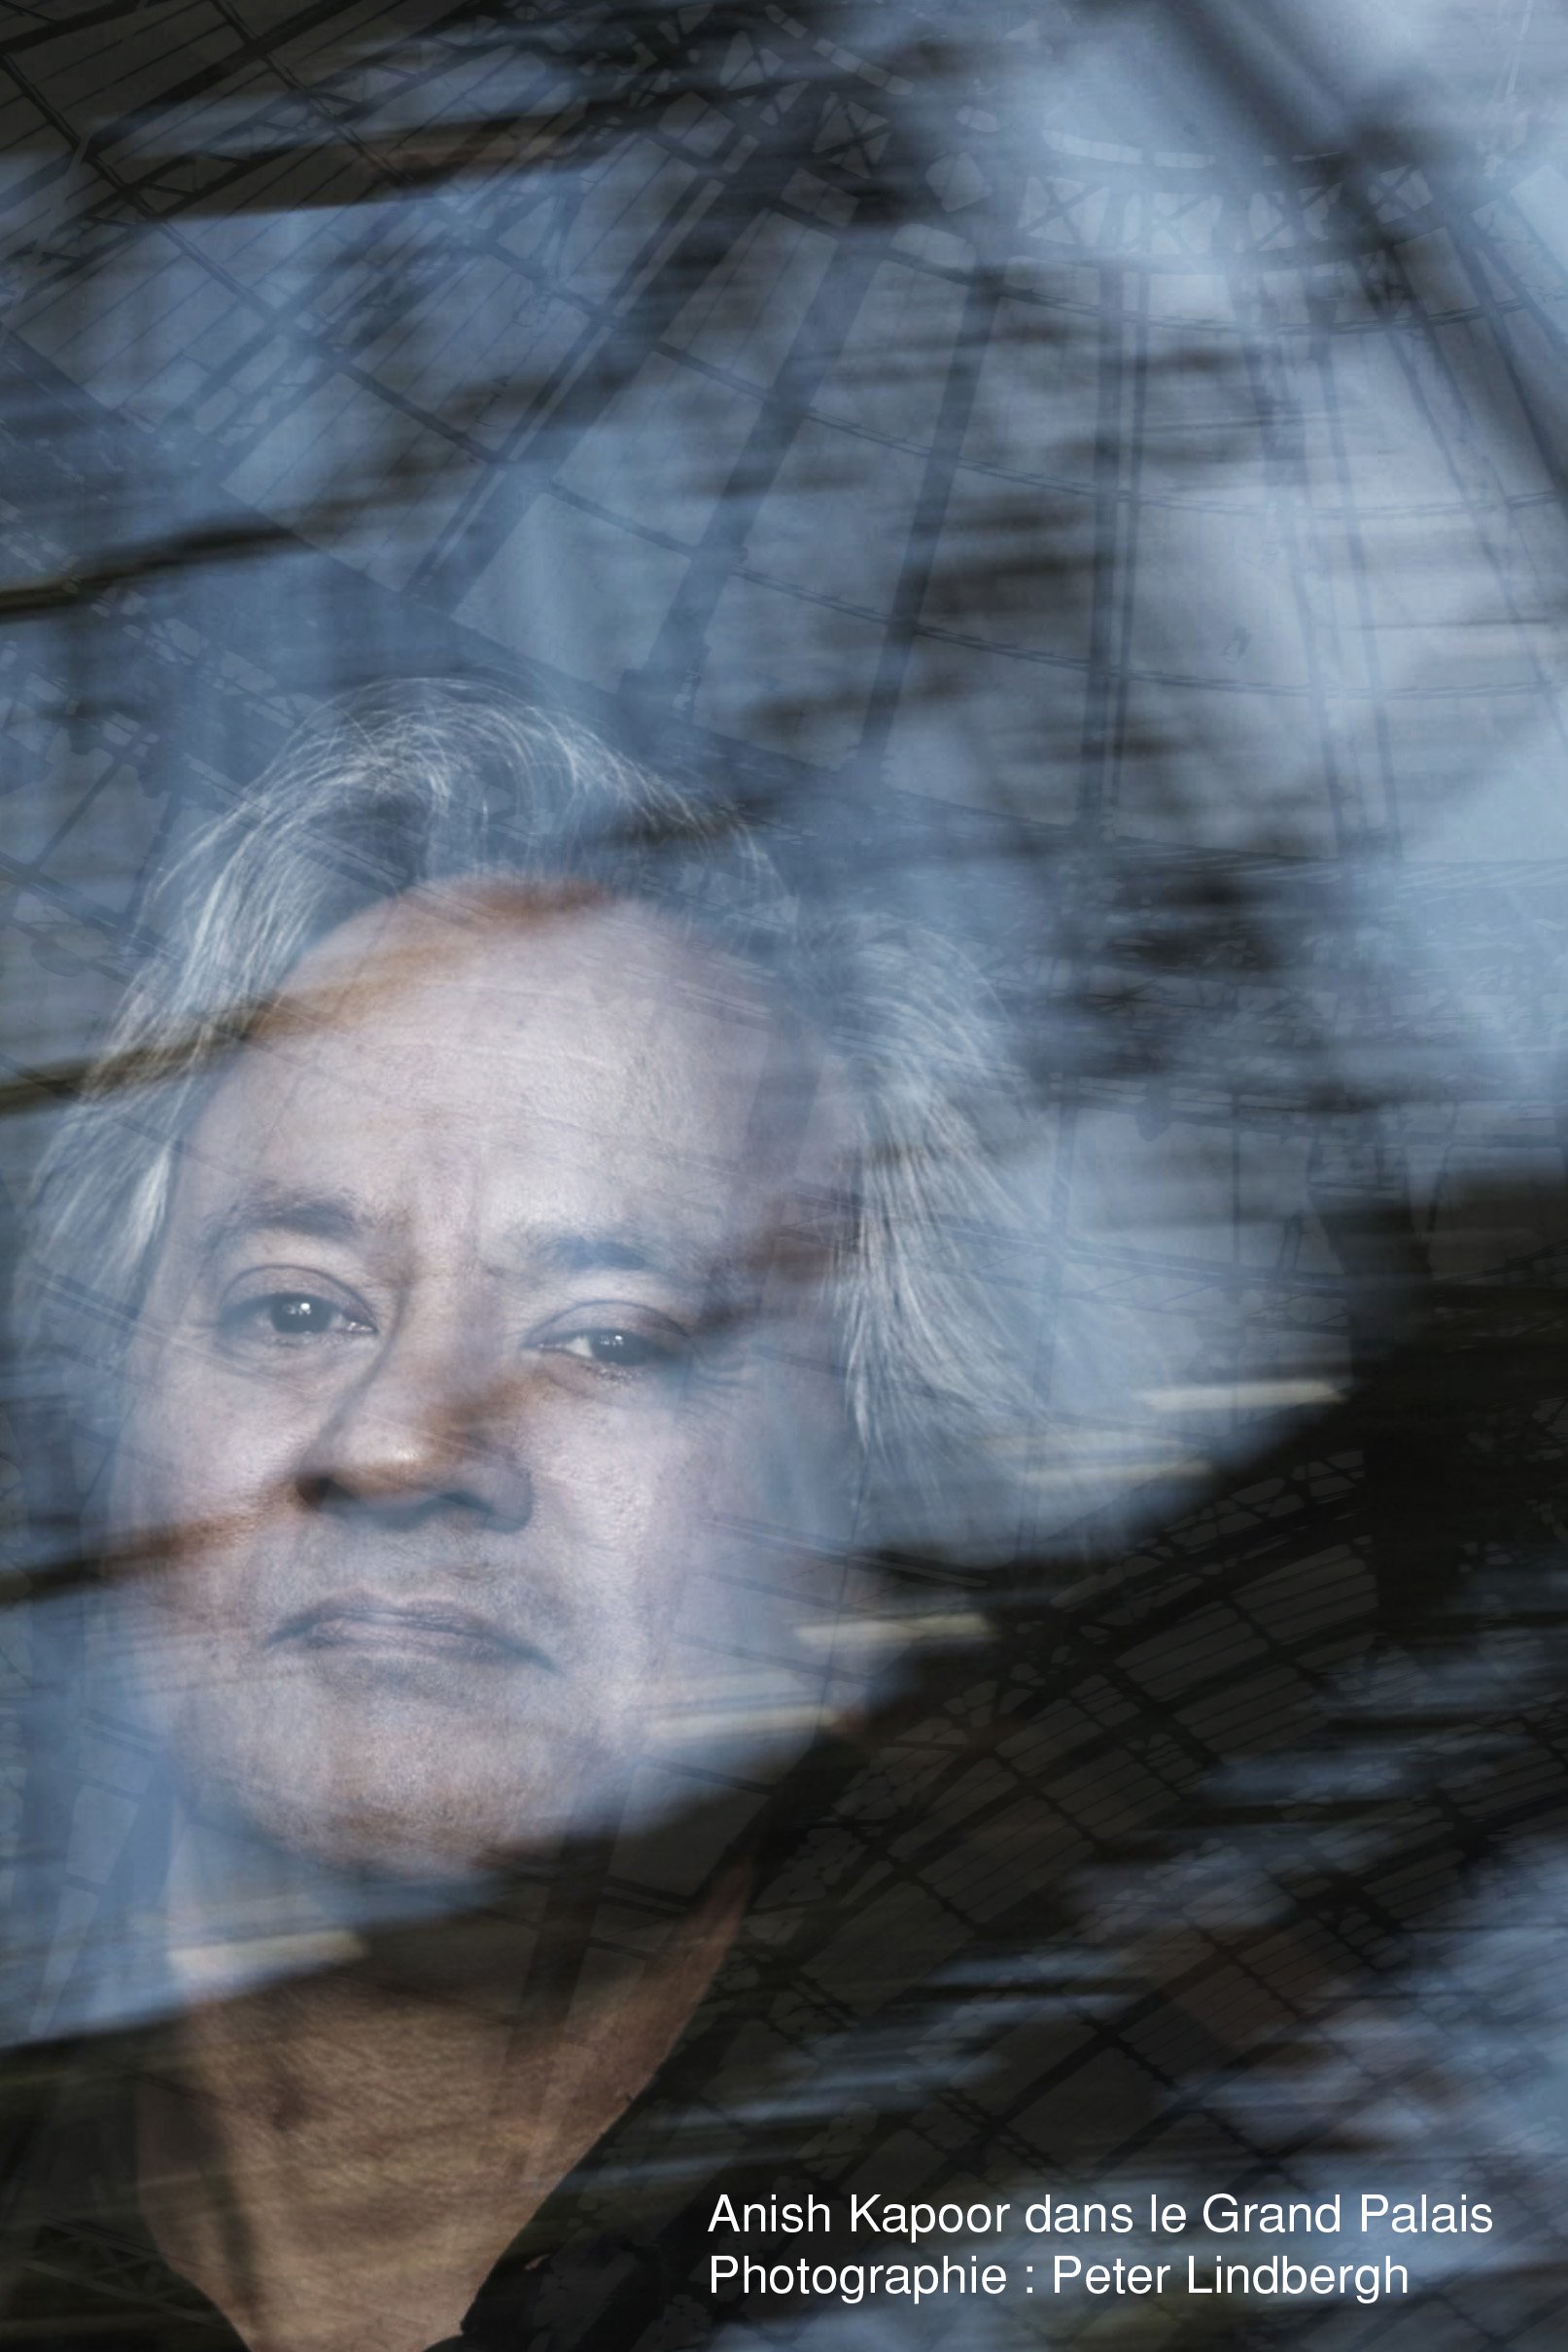 ANISH KAPOOR : DIMENSION, A MATTER OF PERCEPTION